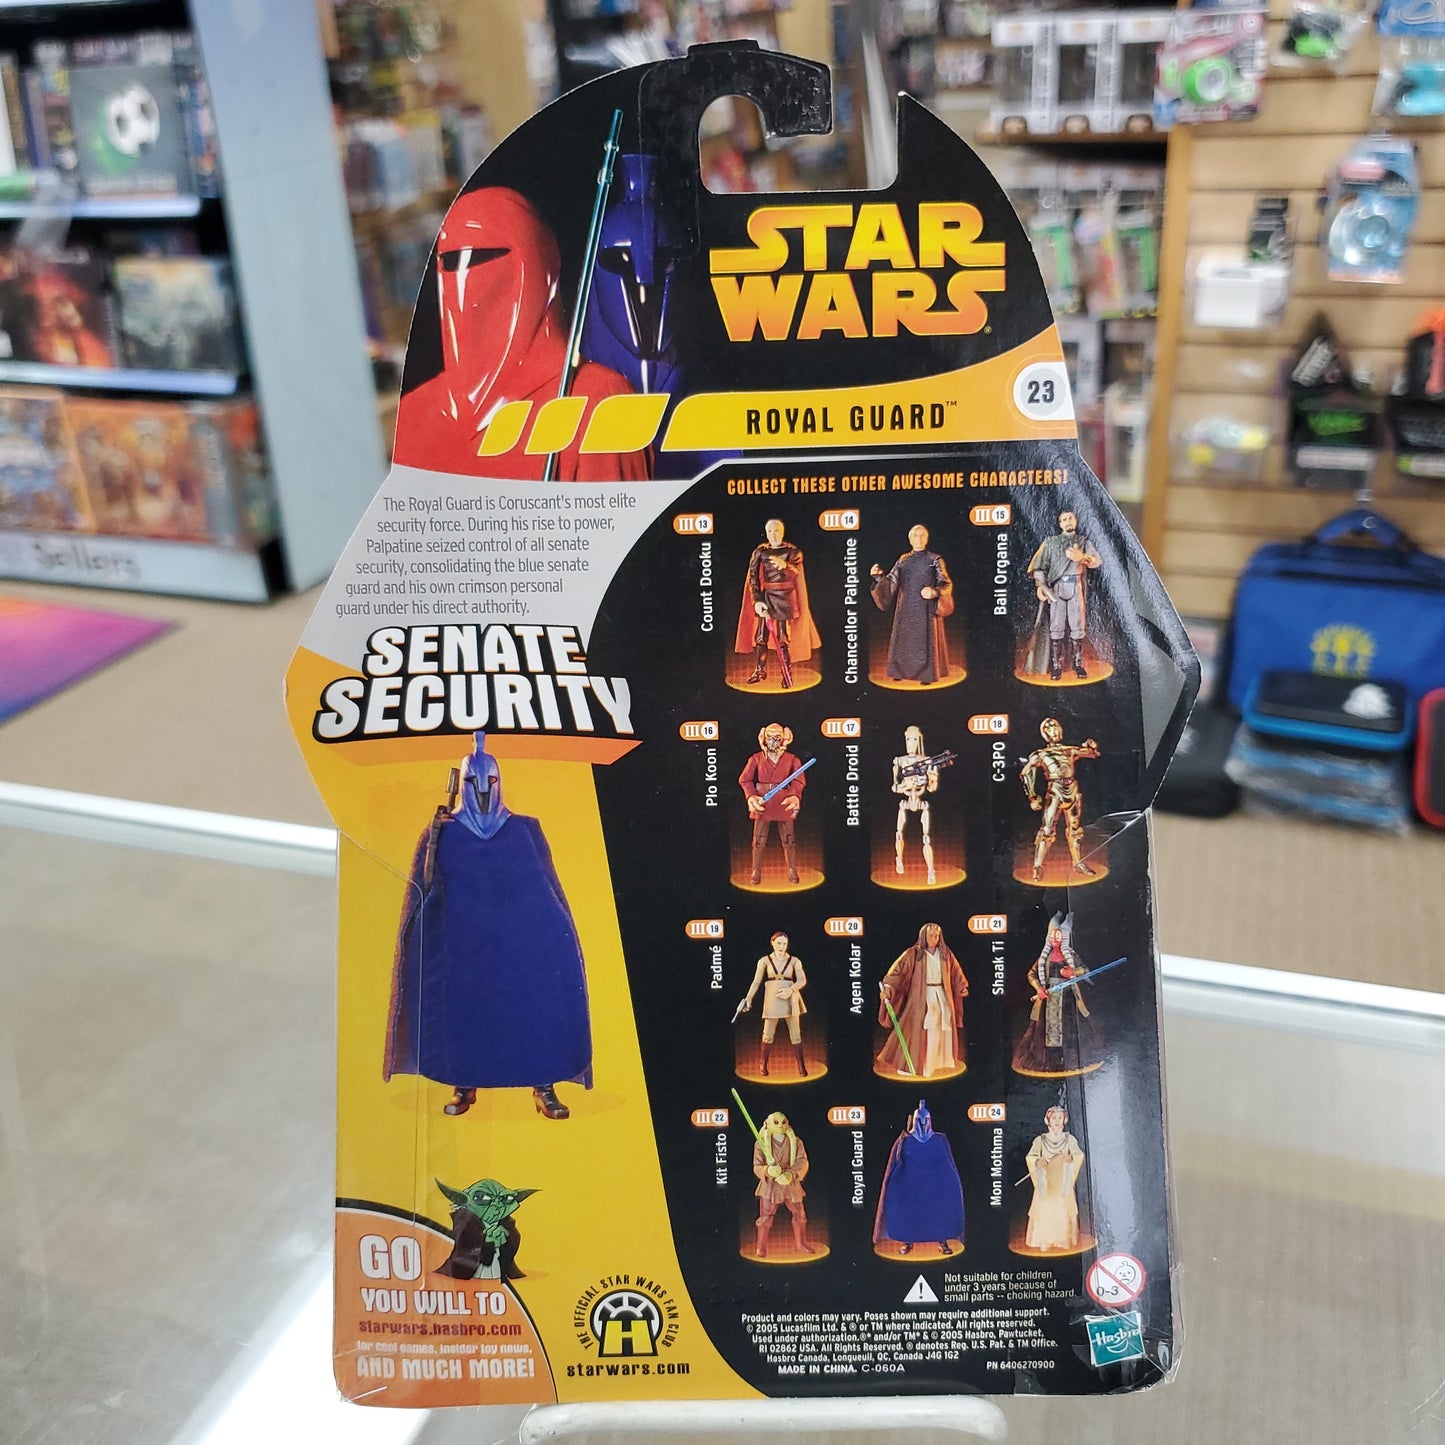 Royal Guard (Senate Security) [Red] - Star Wars Revenge of the Sith Action Figure